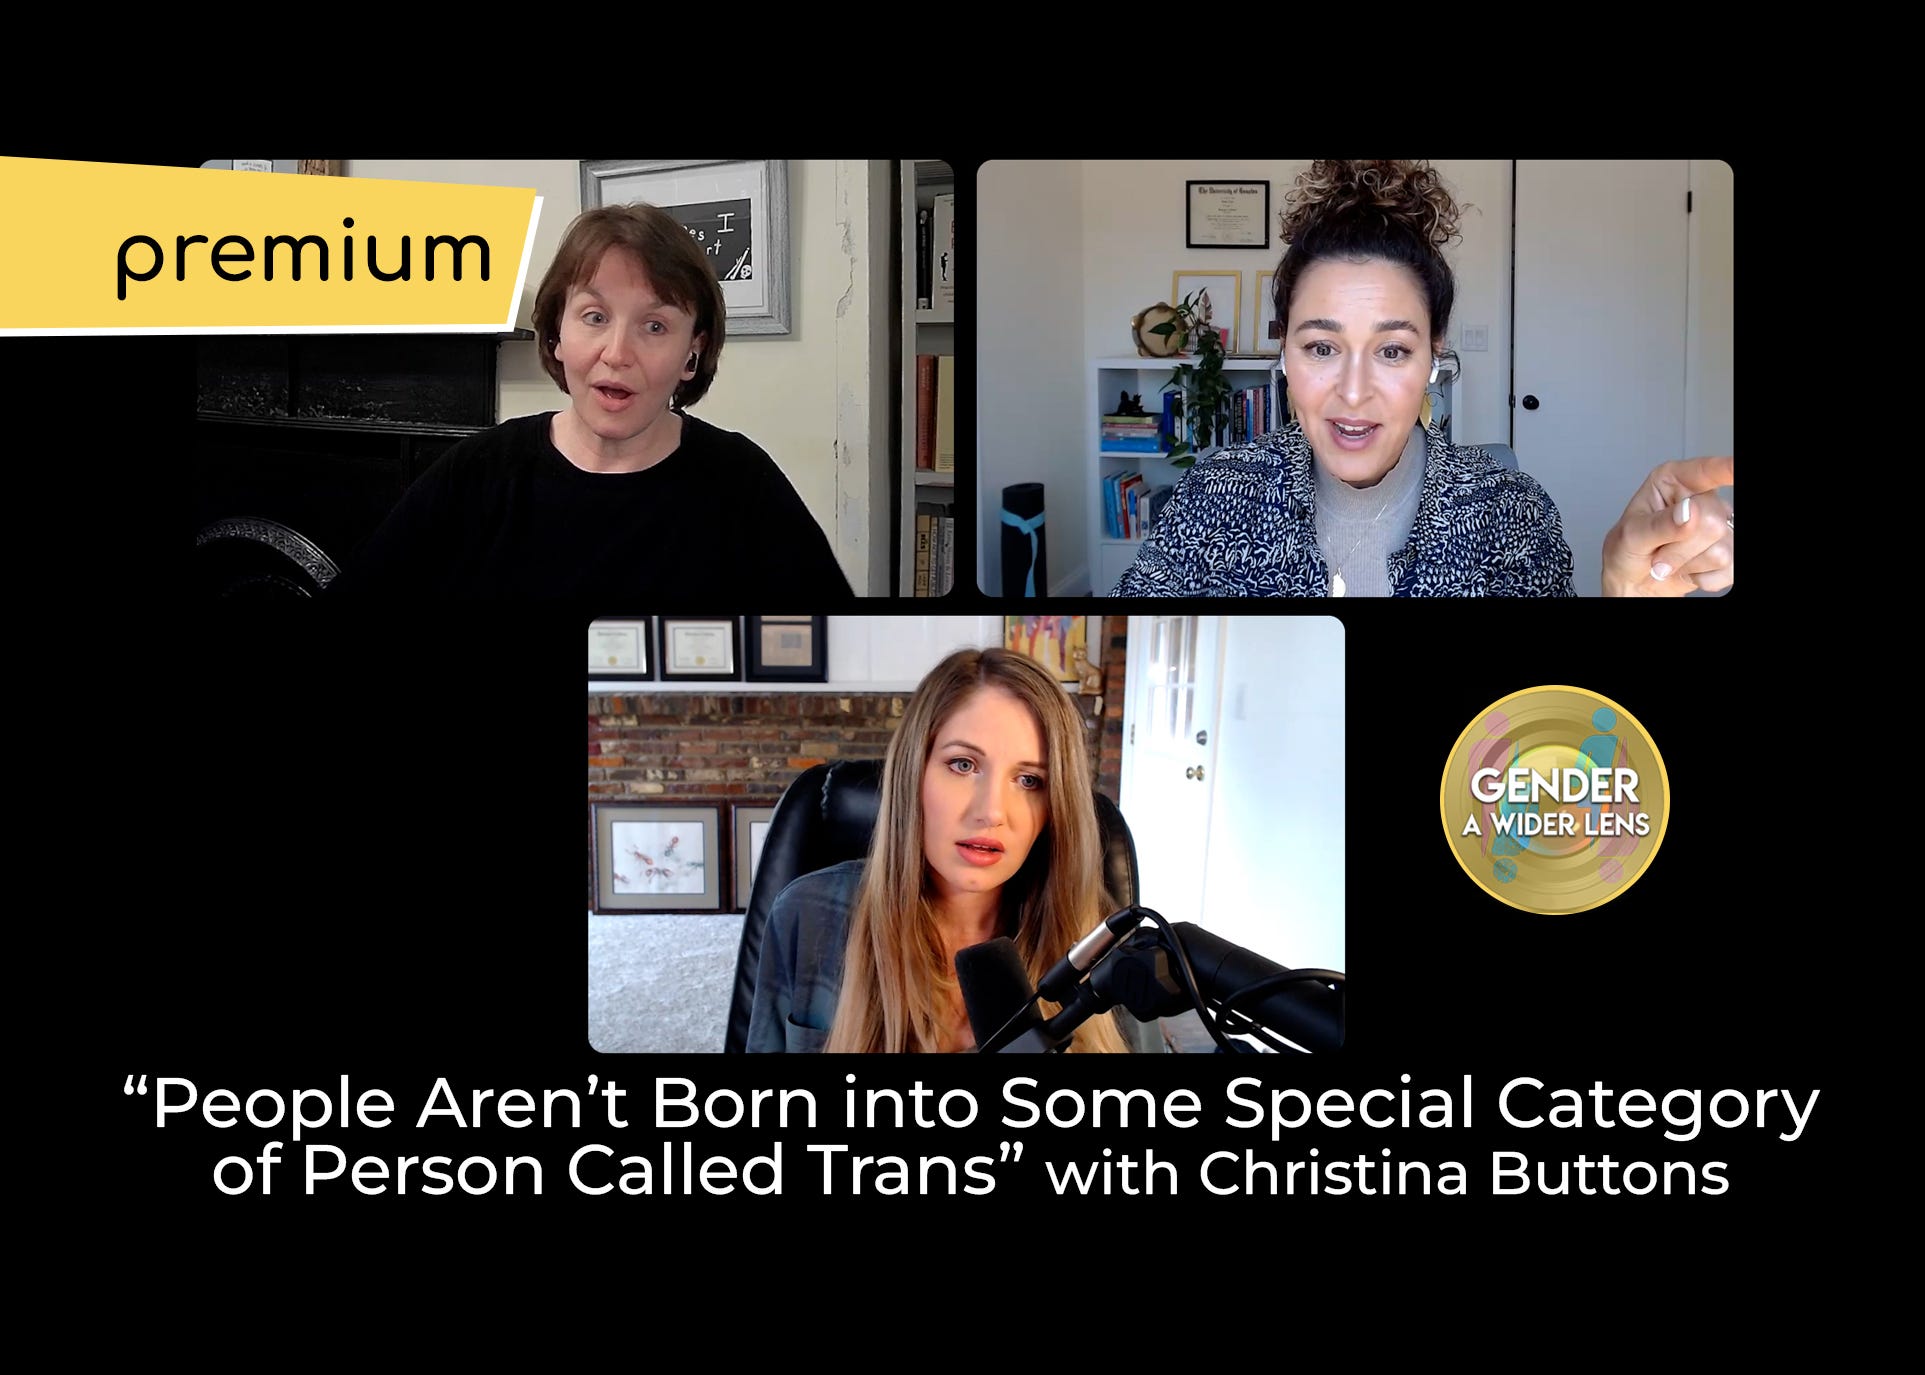 Premium: ”People Aren’t Born into Some Special Category of Person Called Trans”